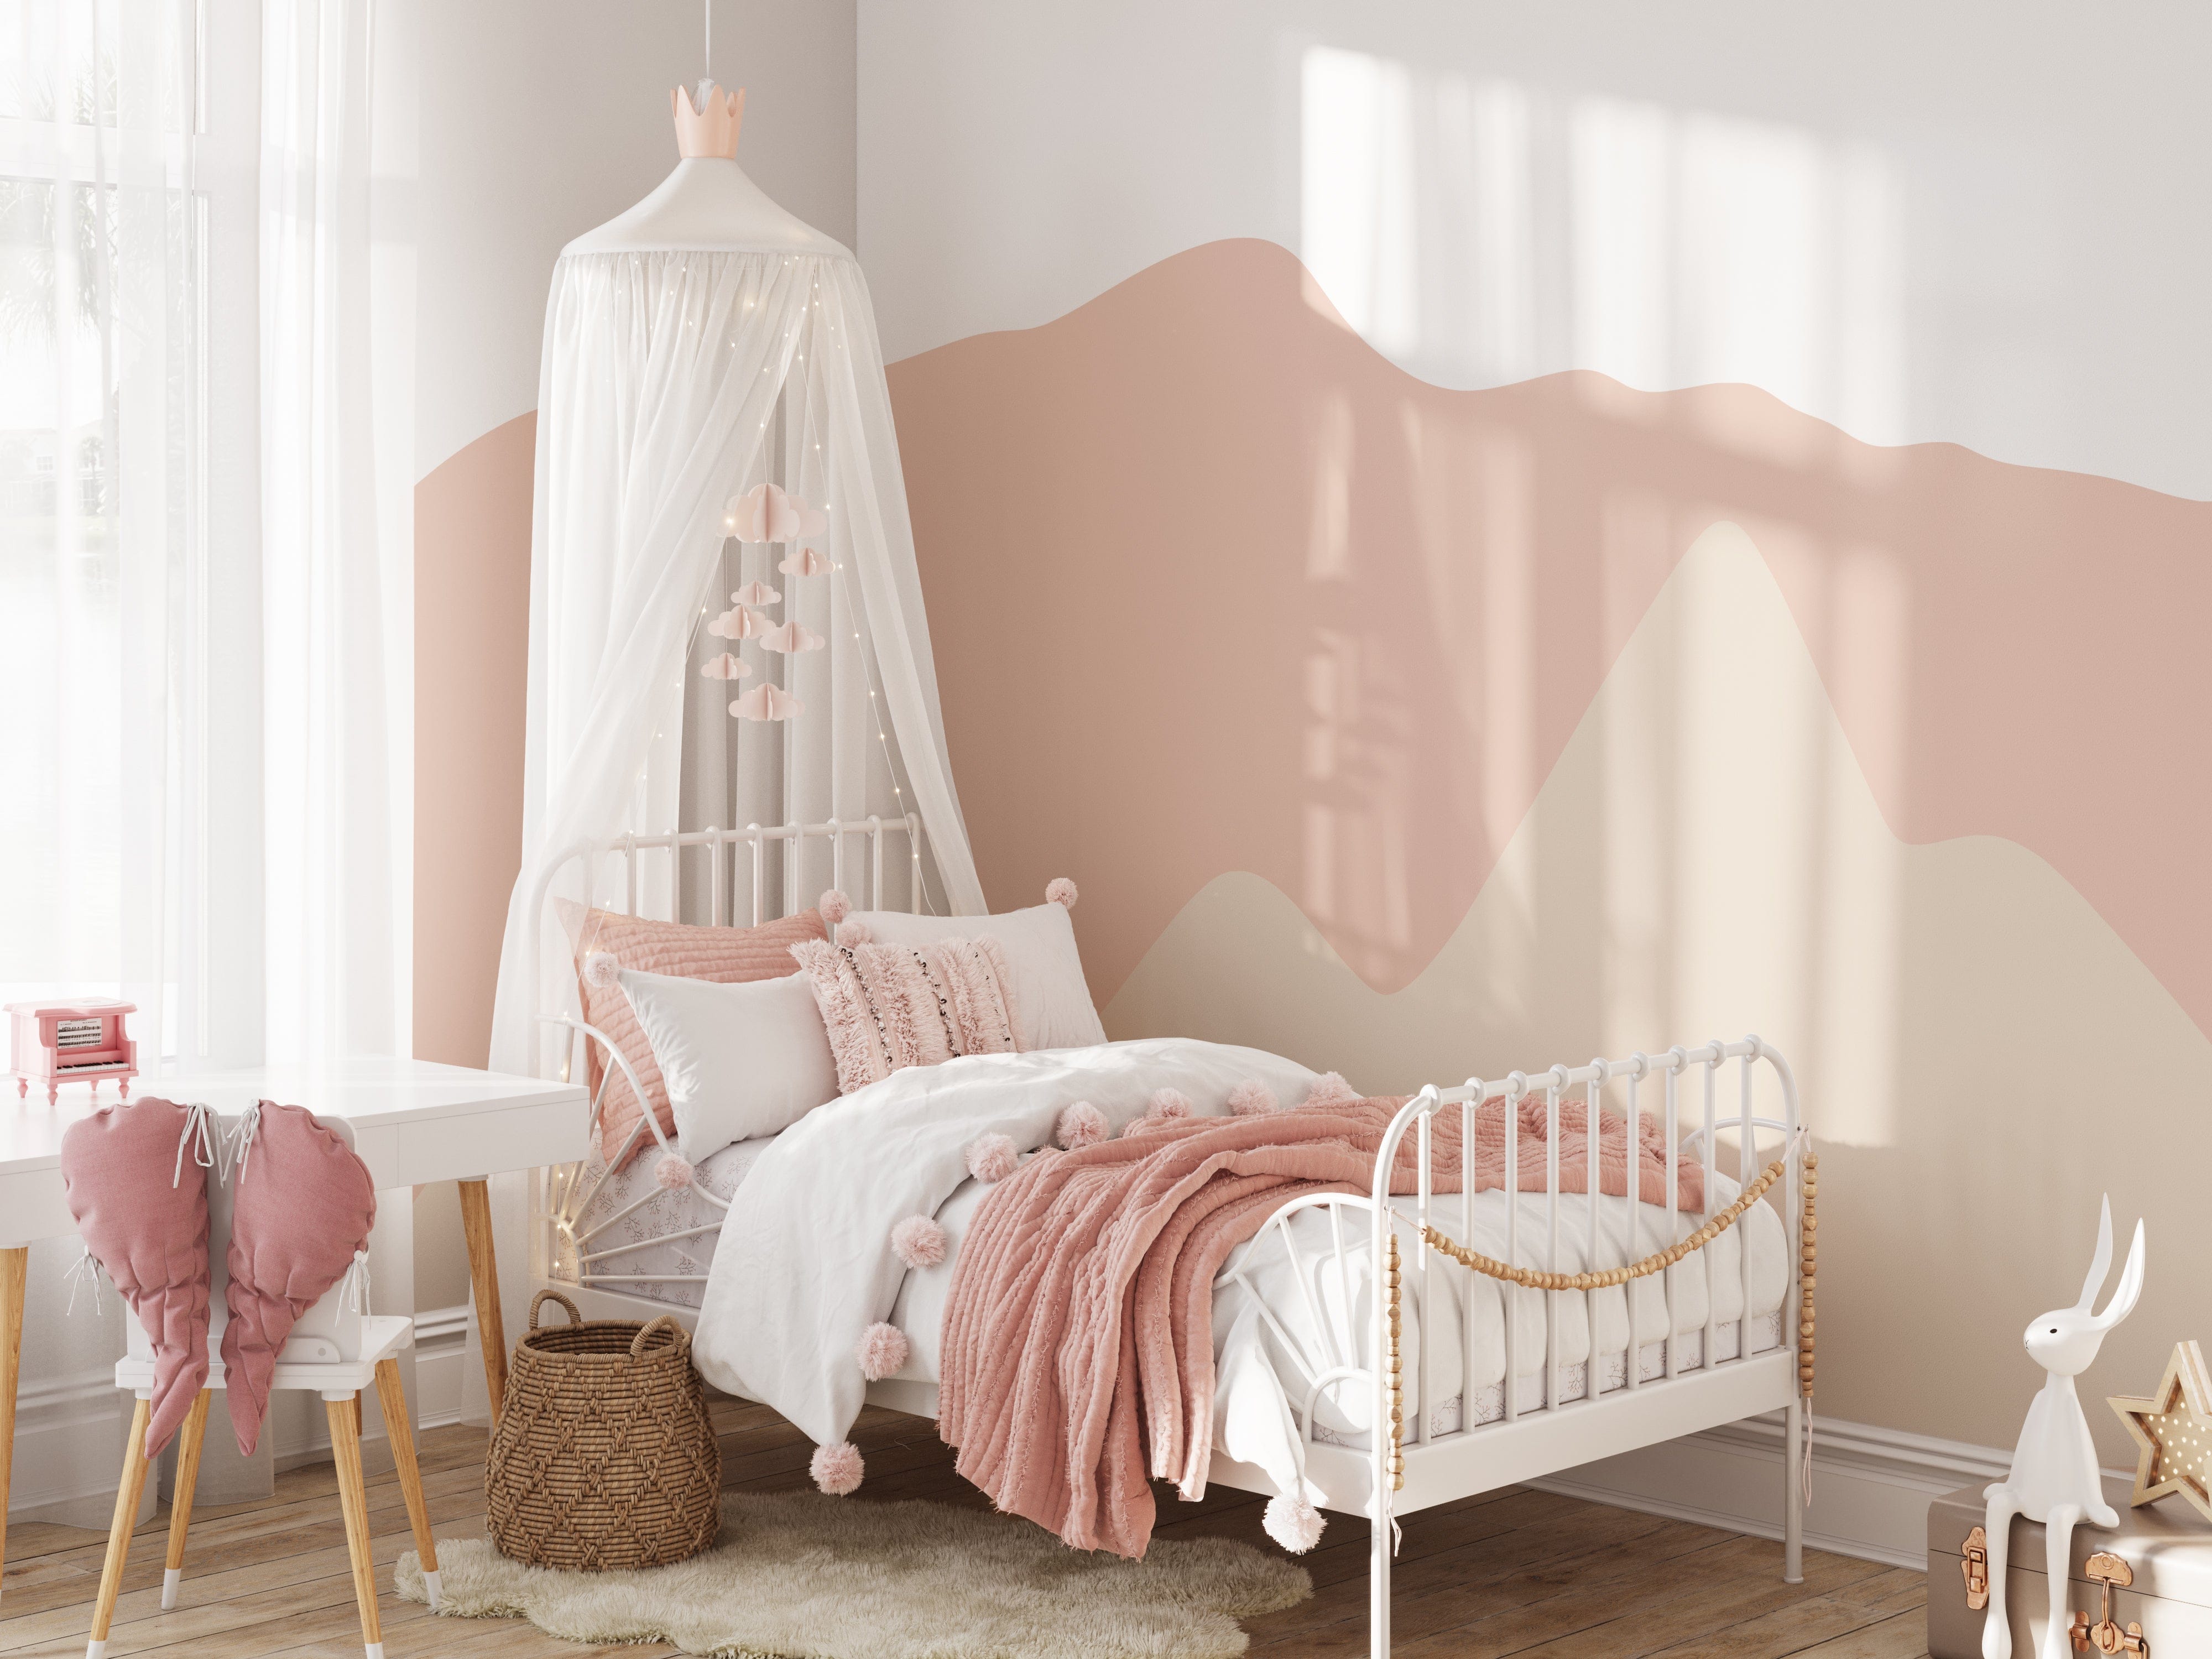 Pretty Hills Mural in a cozy kids' bedroom with a white bed draped with a canopy, pink and white bedding, a wicker basket, and a white desk. The wallpaper showcases soothing wavy pastel hills in shades of pink and beige.